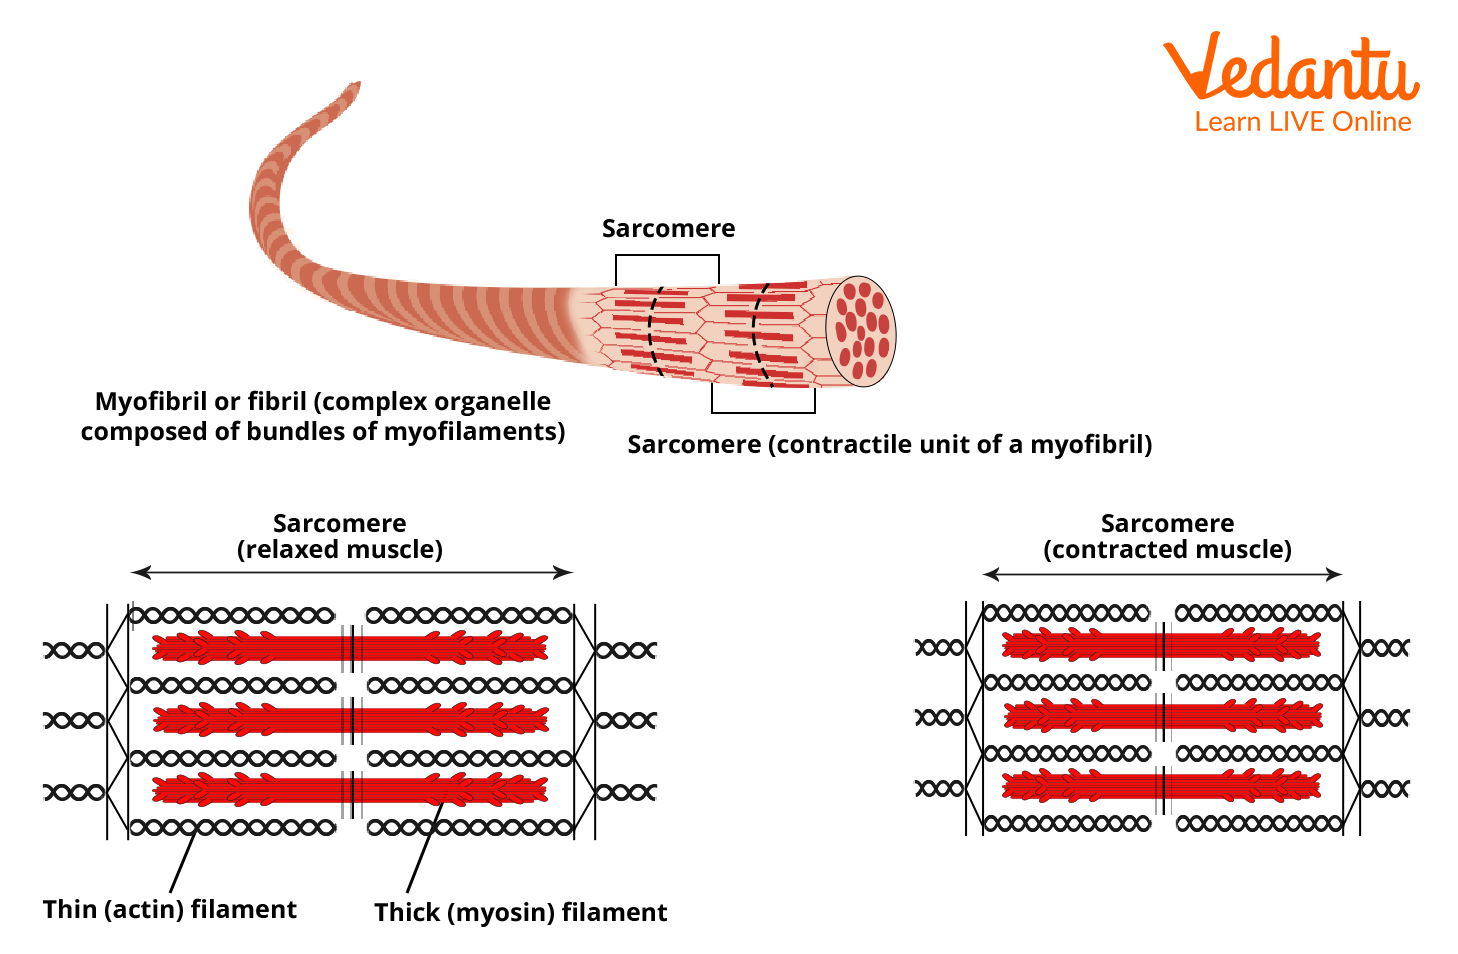 Sarcomere: The structural and functional unit of muscle fibres